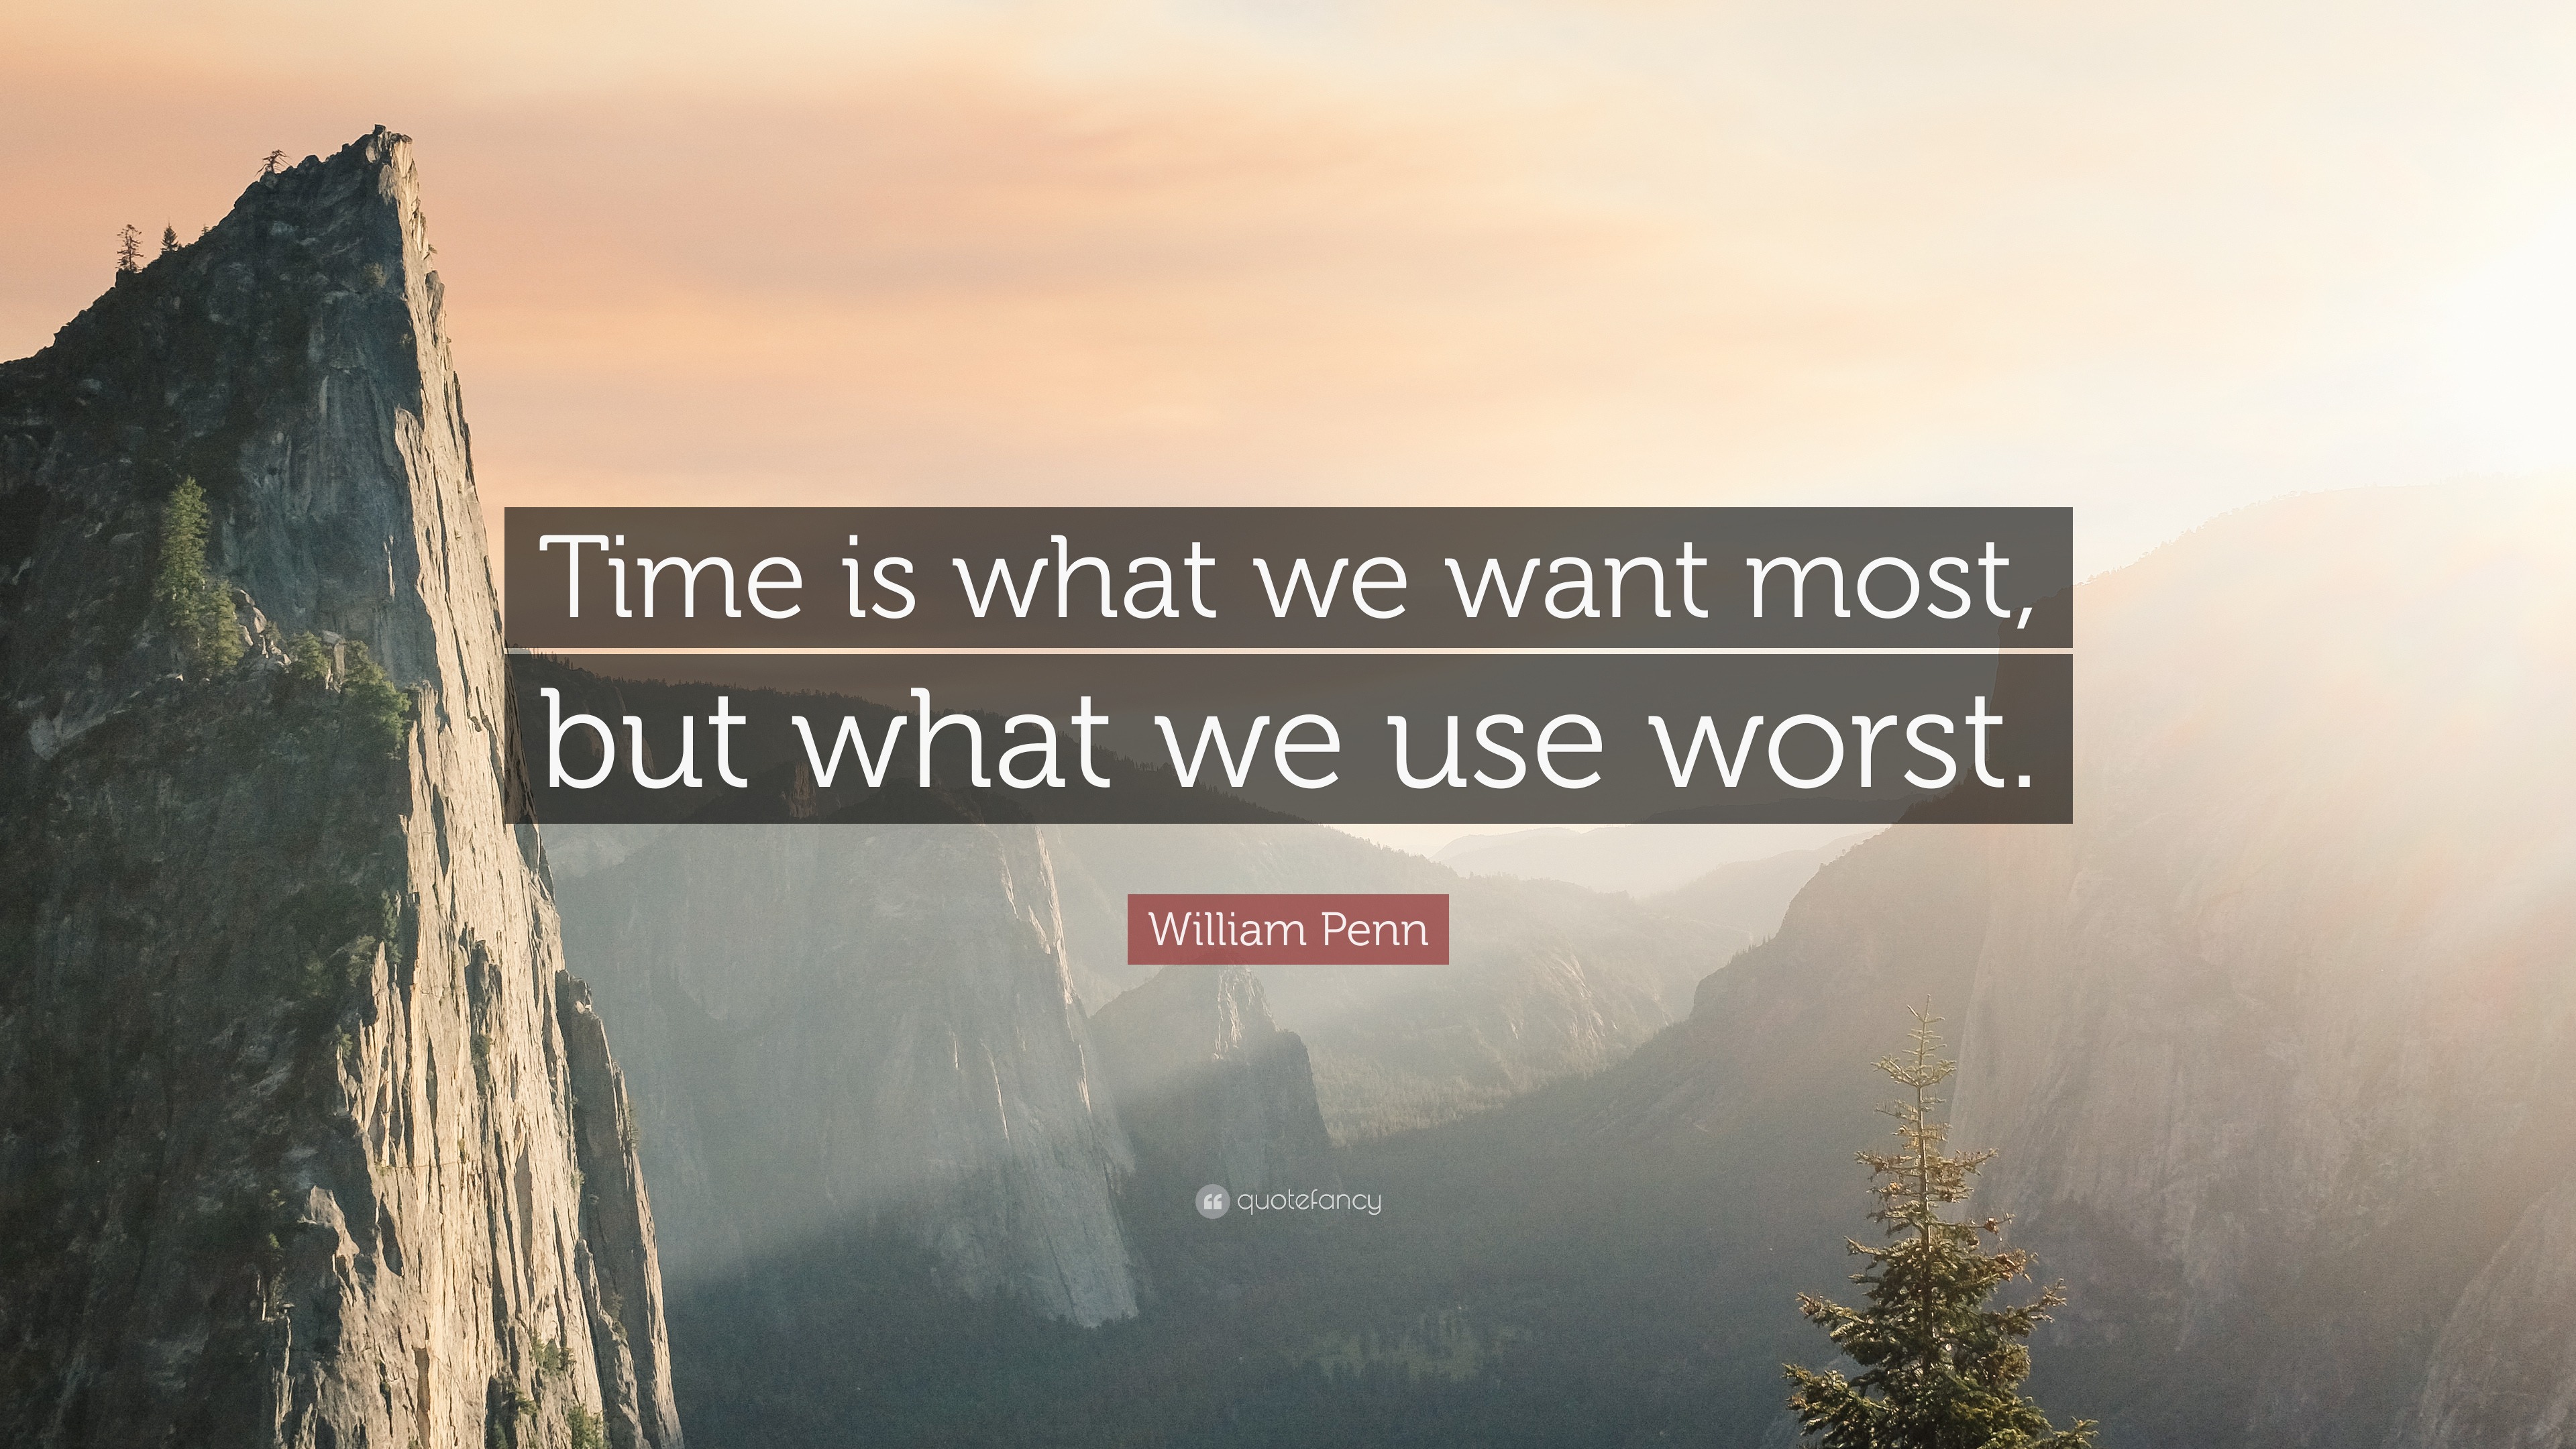 William Penn Quote: “Time is what we want most, but what we use worst.”